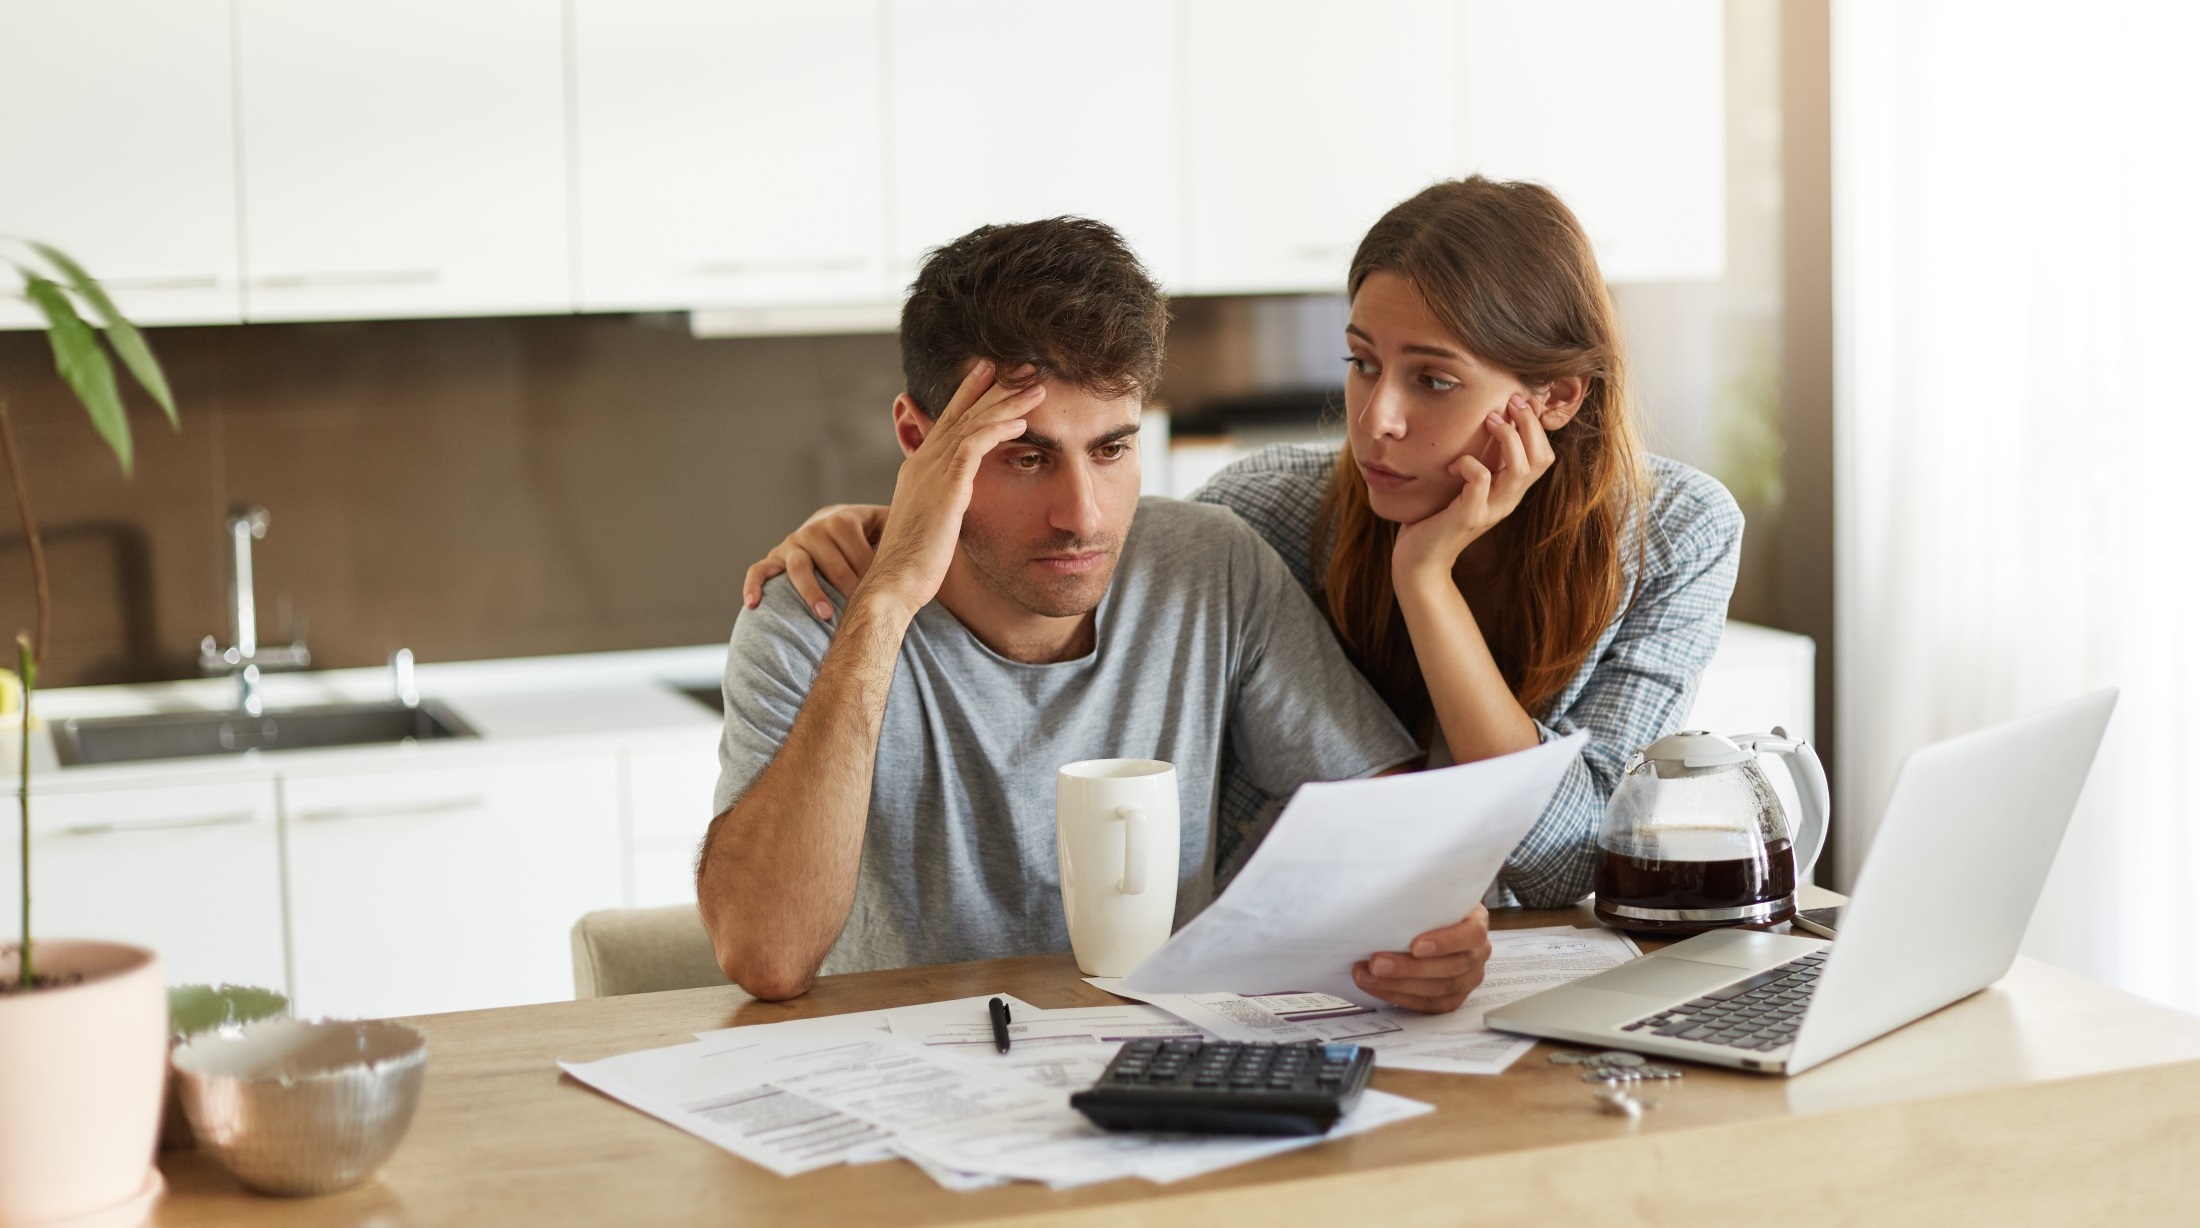 Common Mistakes to Avoid When Applying for a Home Loan